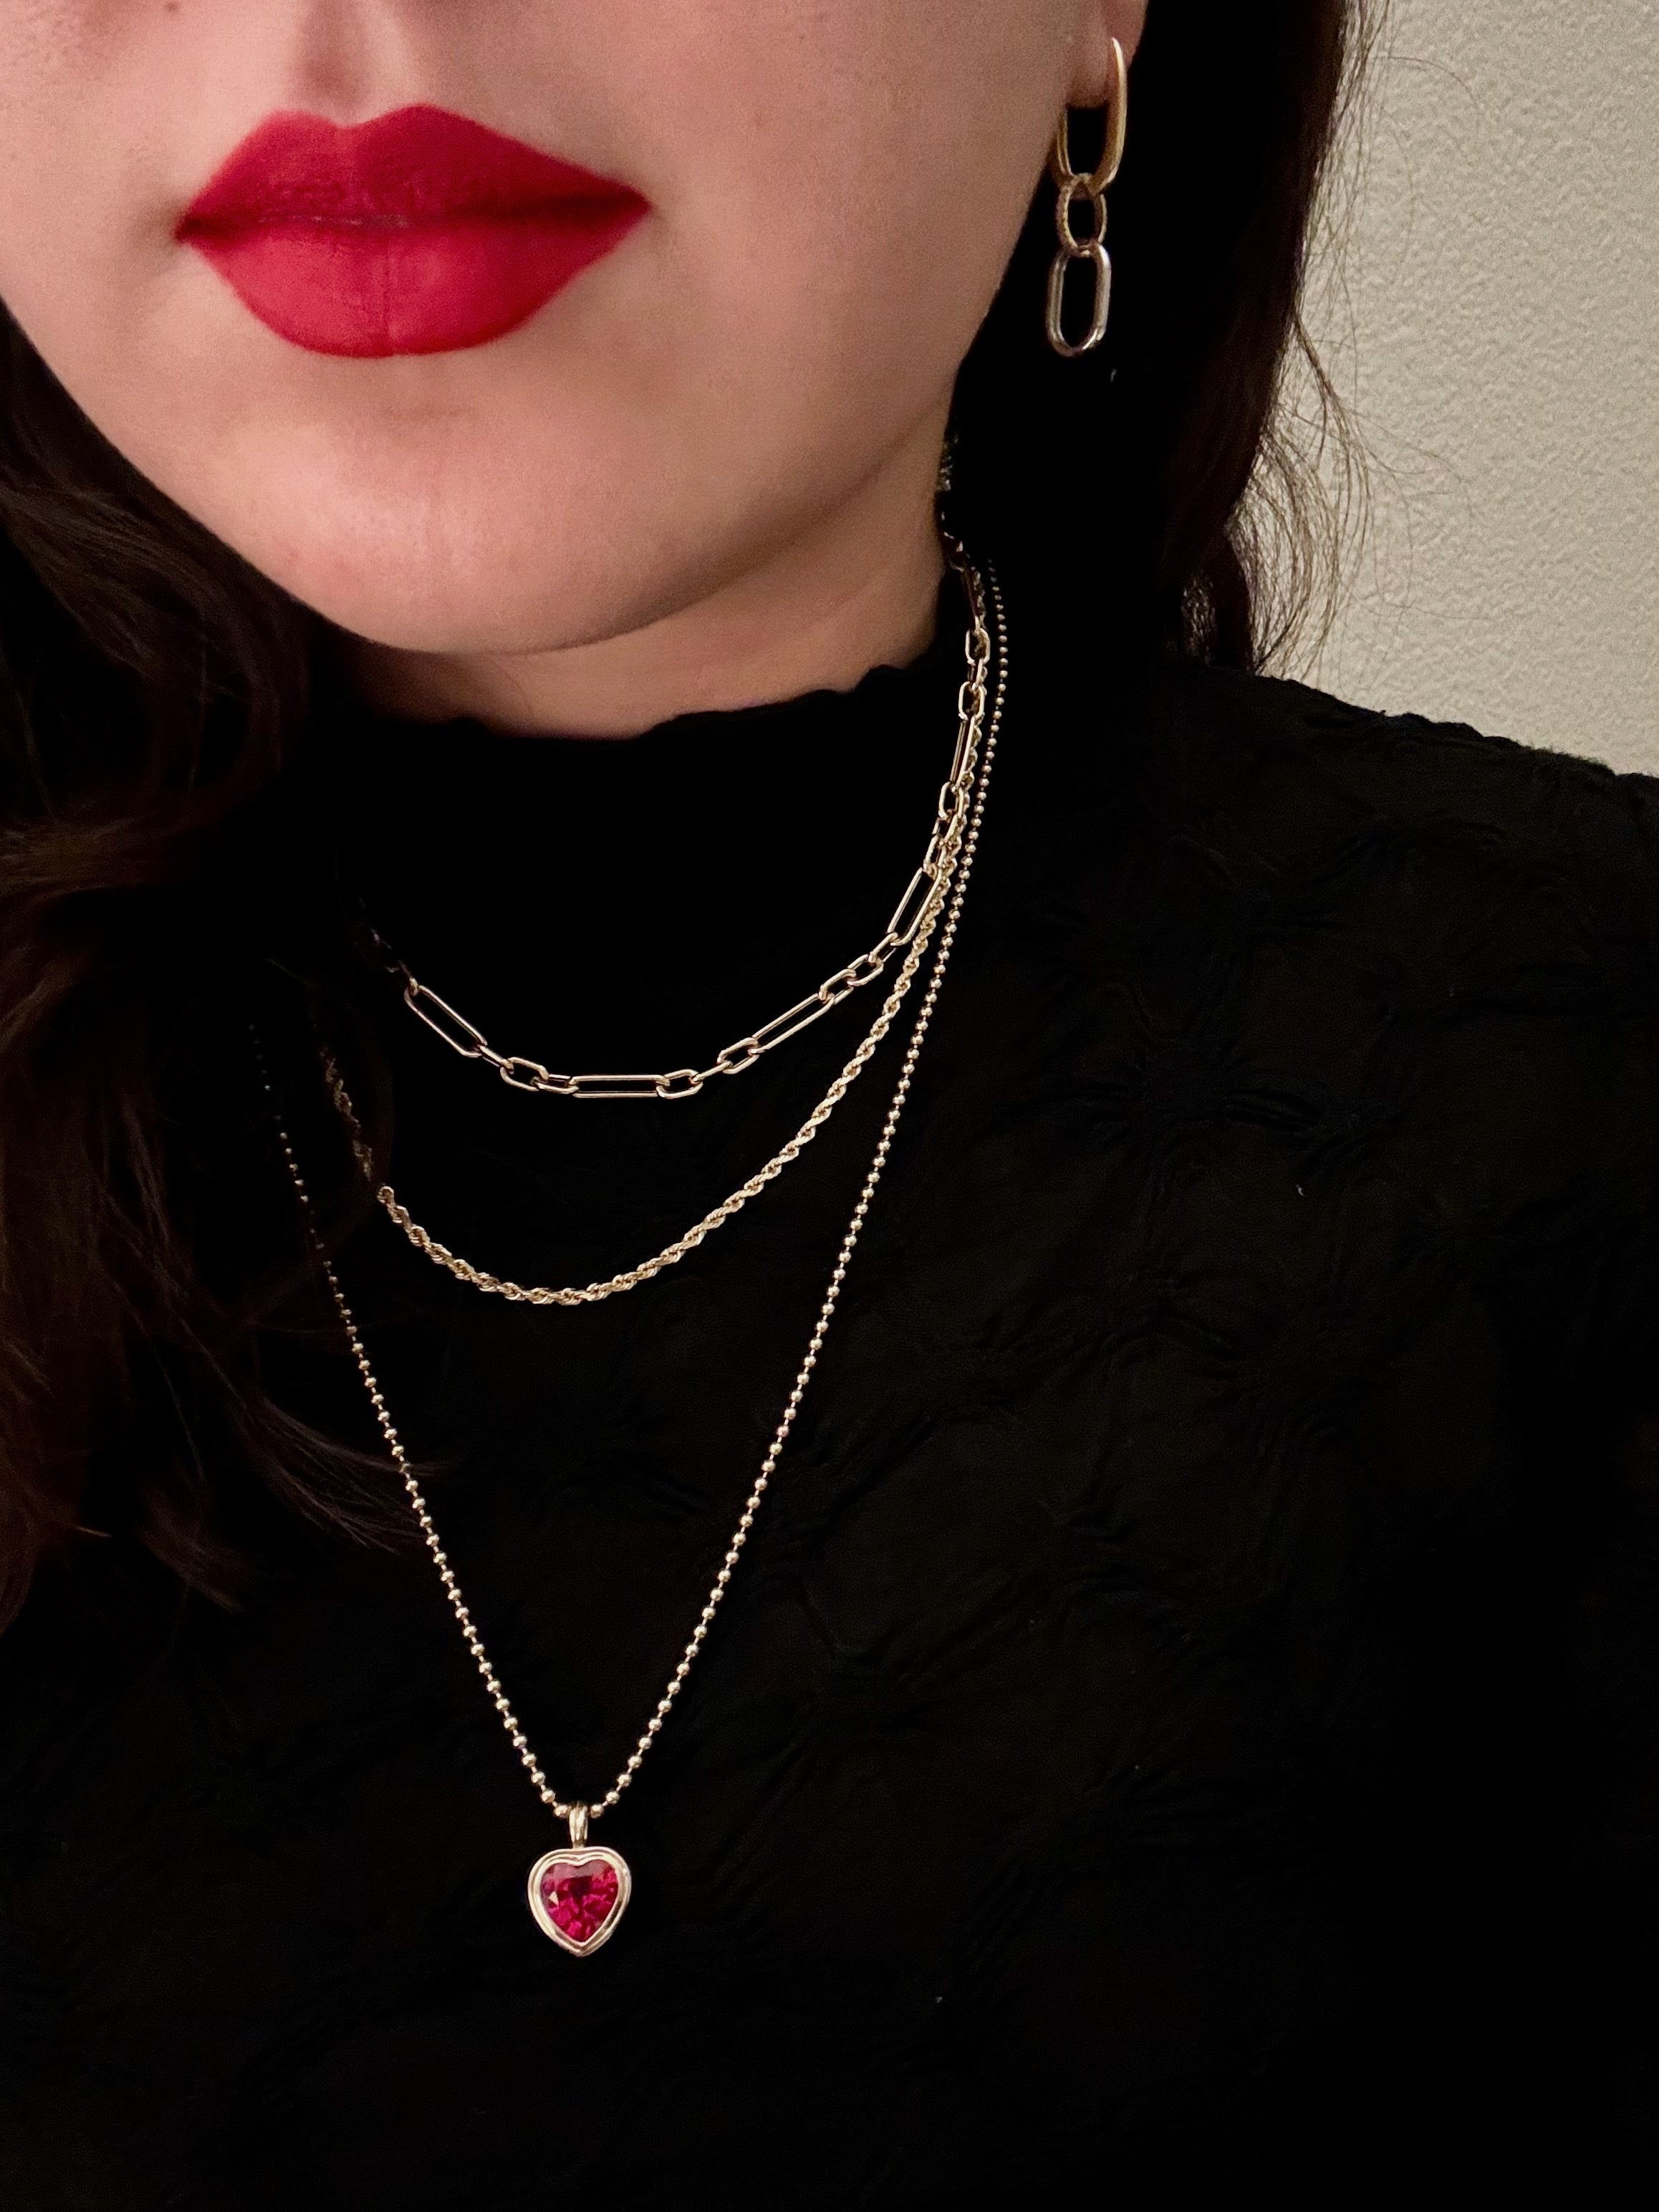 Heart Ruby Pendant | Necklace